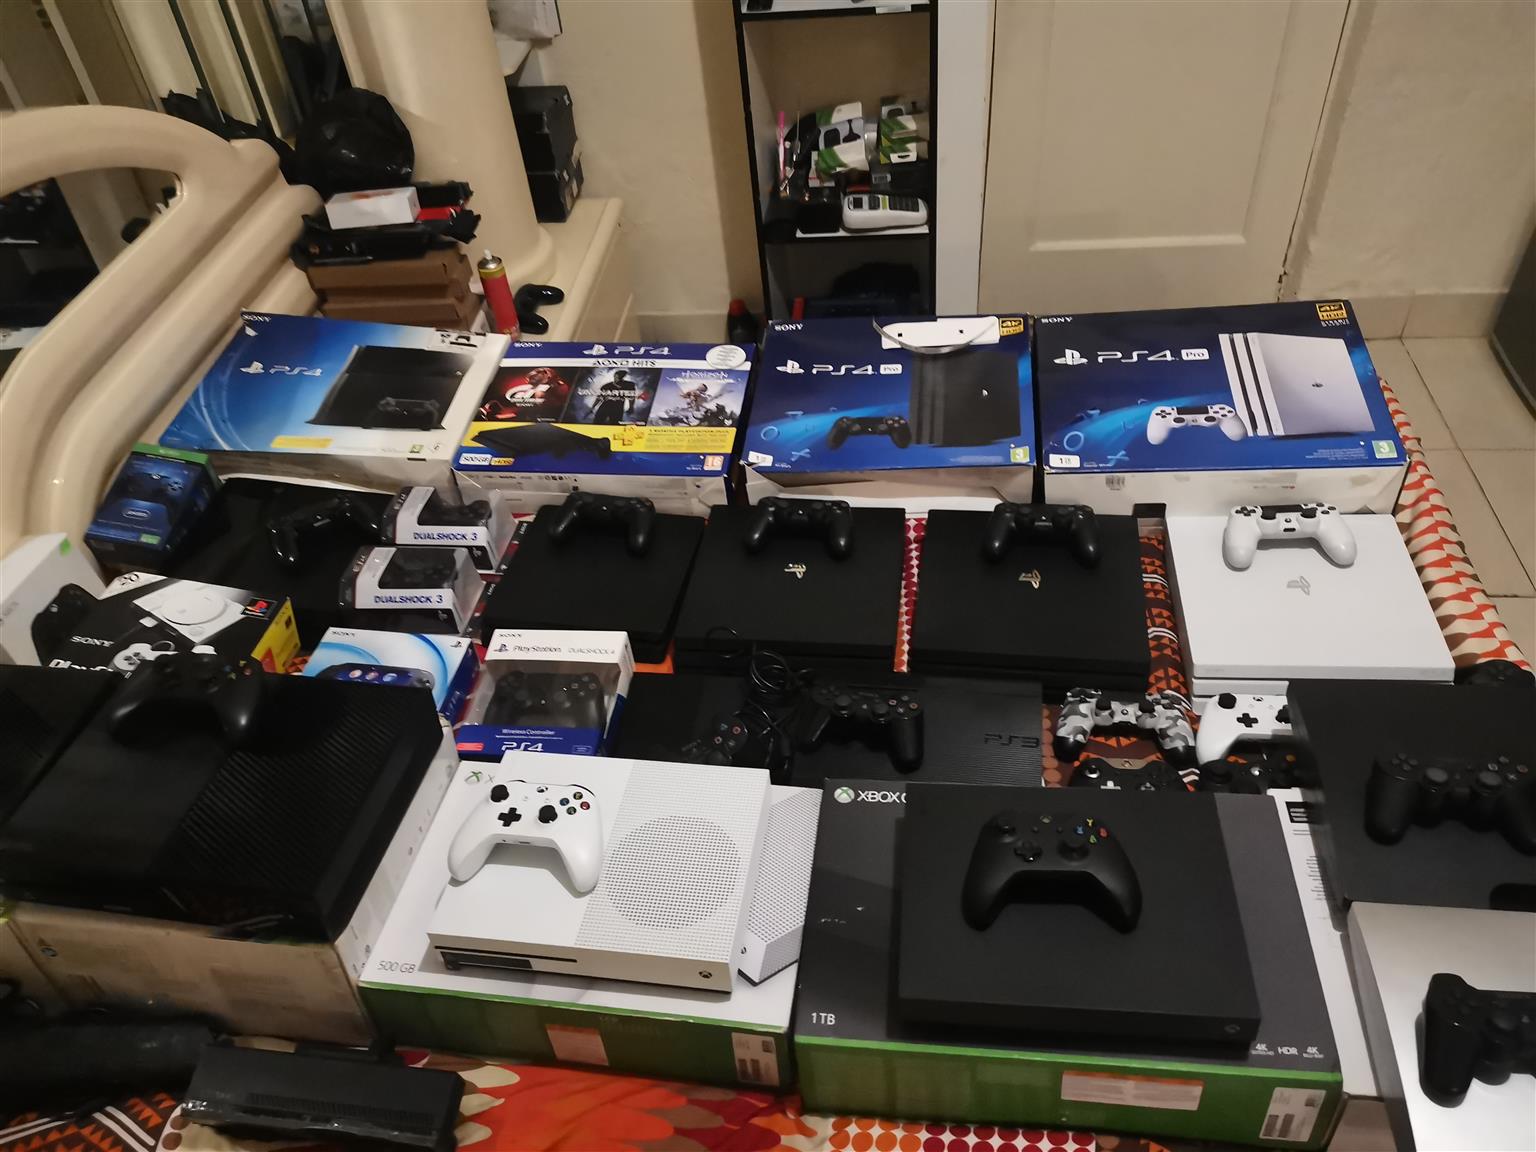 All Gaming Consoles JHB 2022 Pricelist Ps4 R4500 Ps4 slim R4999 Ps4 pro R6500